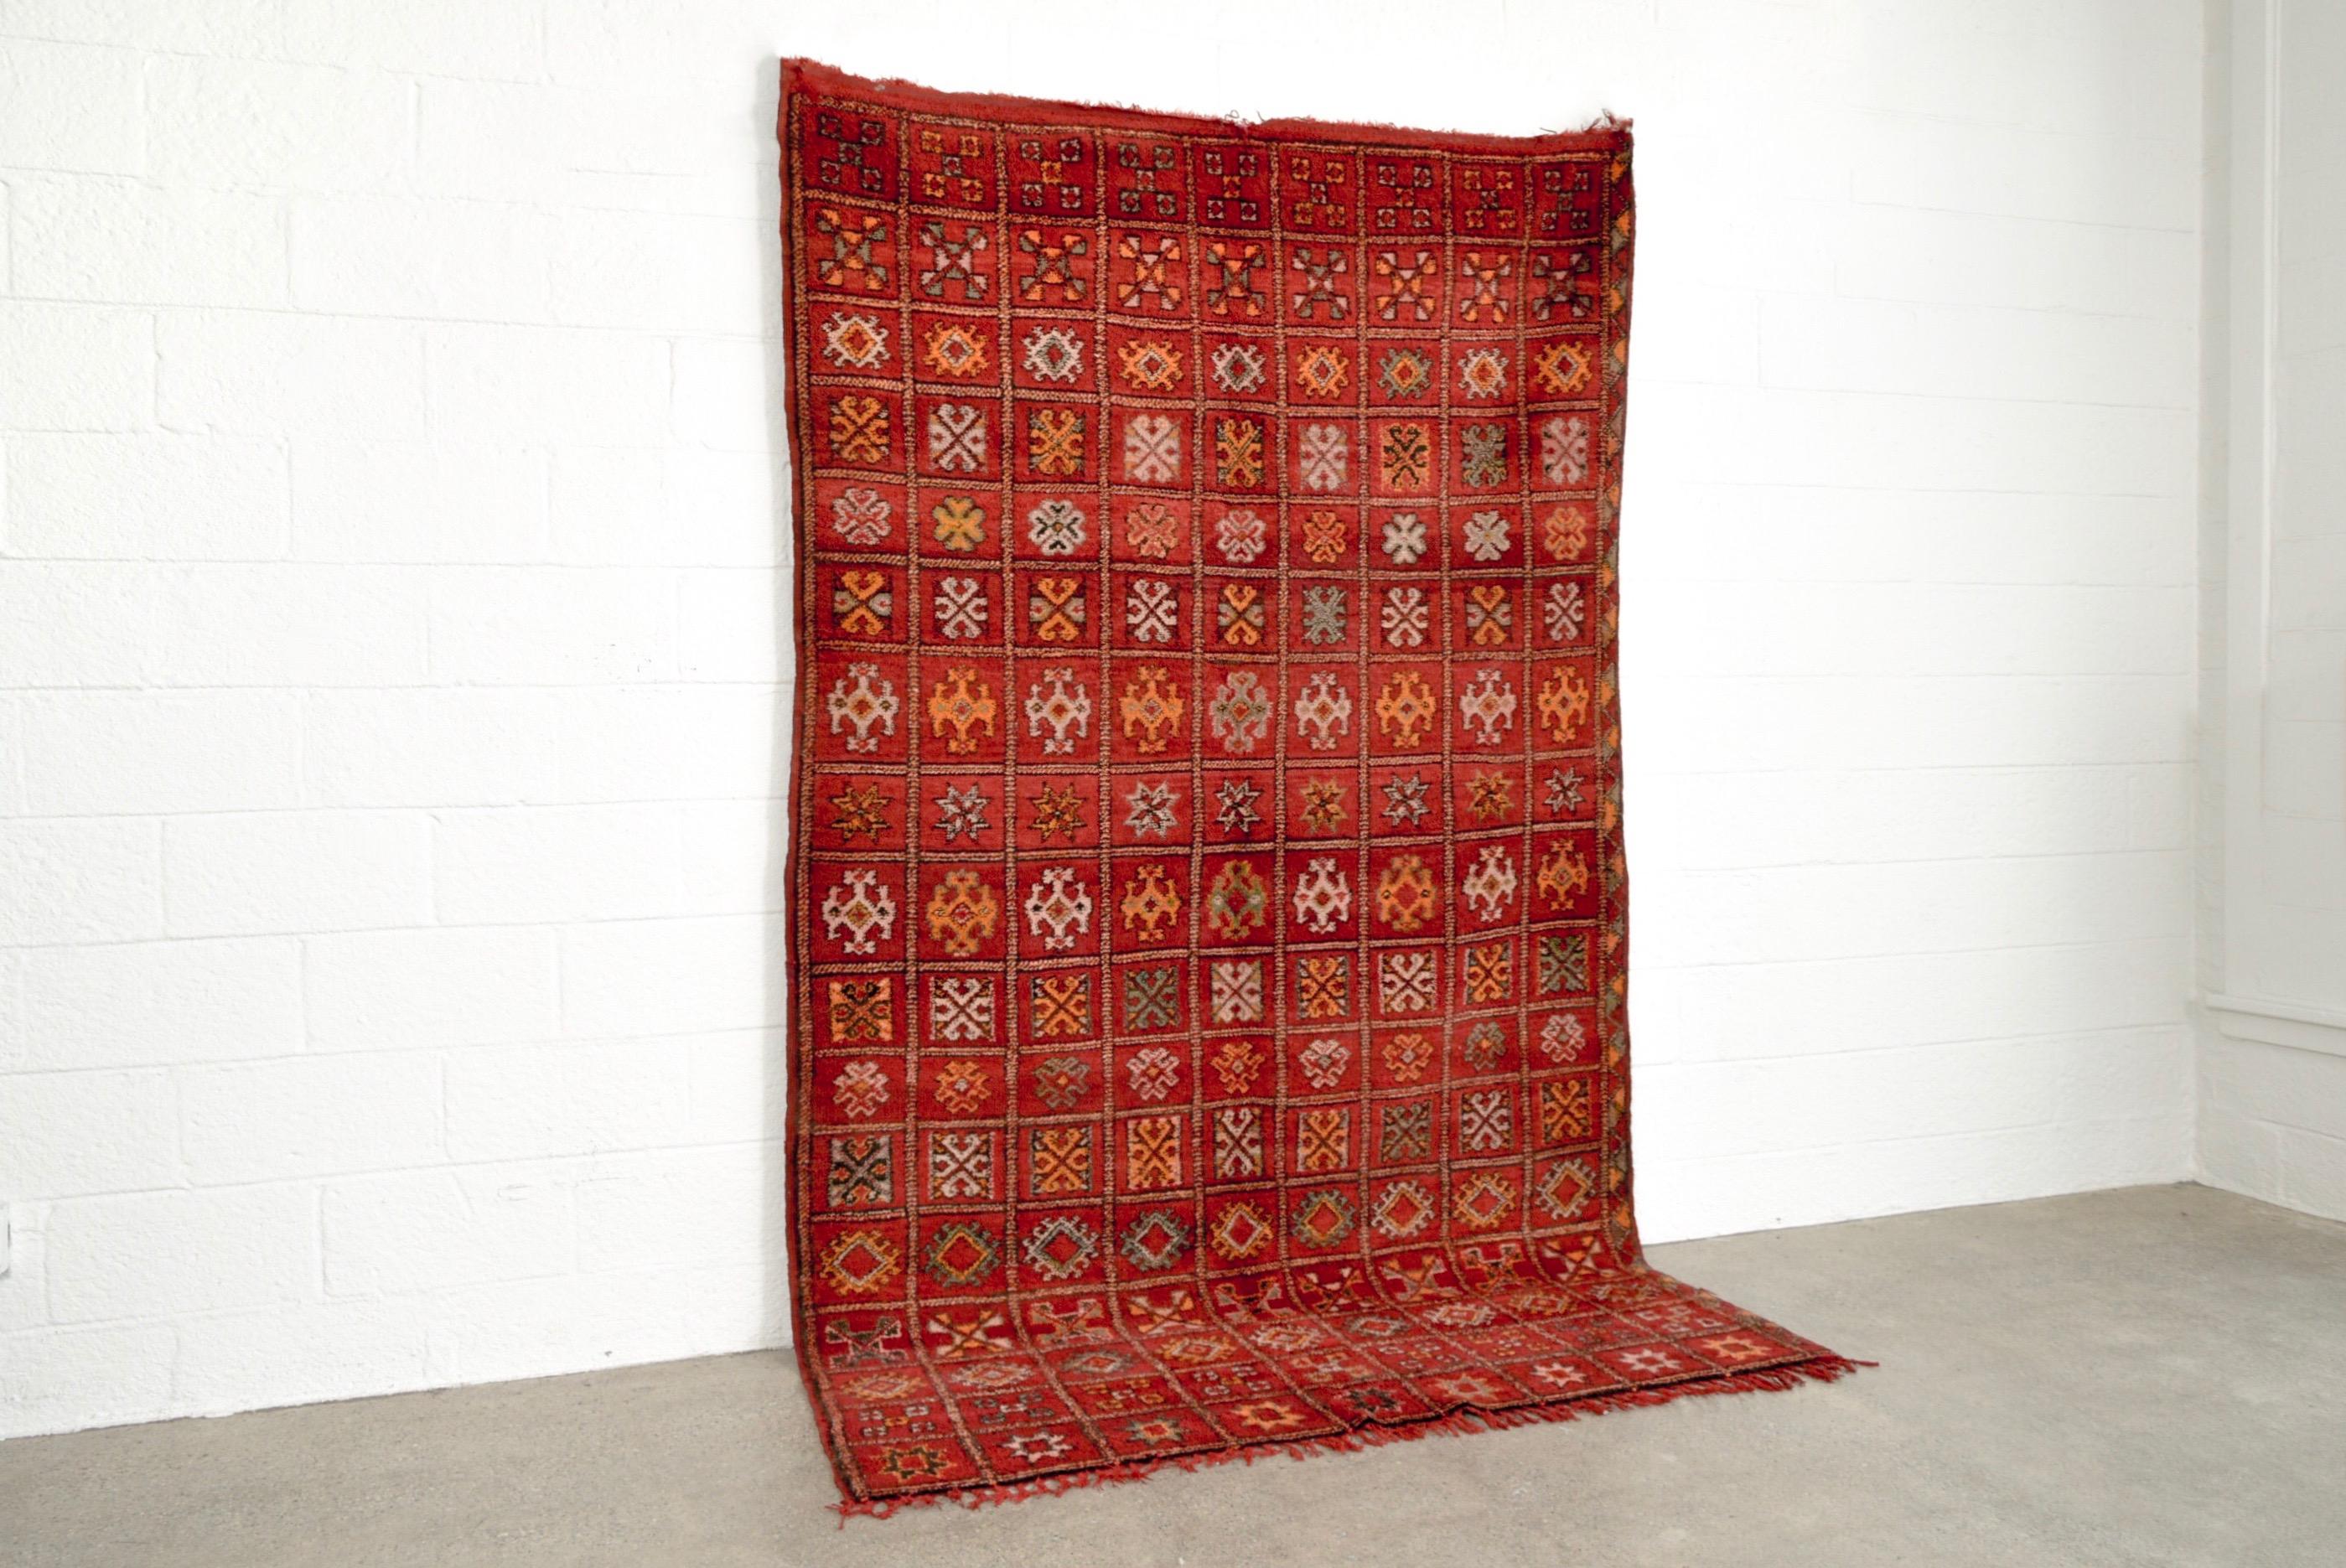 This rich vintage handwoven Moroccan Boujad large area rug features an overall geometric pattern composed of a grid of intricate lozenges with smaller squares, pointed stars, crosses and other Berber symbolism. With a soft low pile texture, the